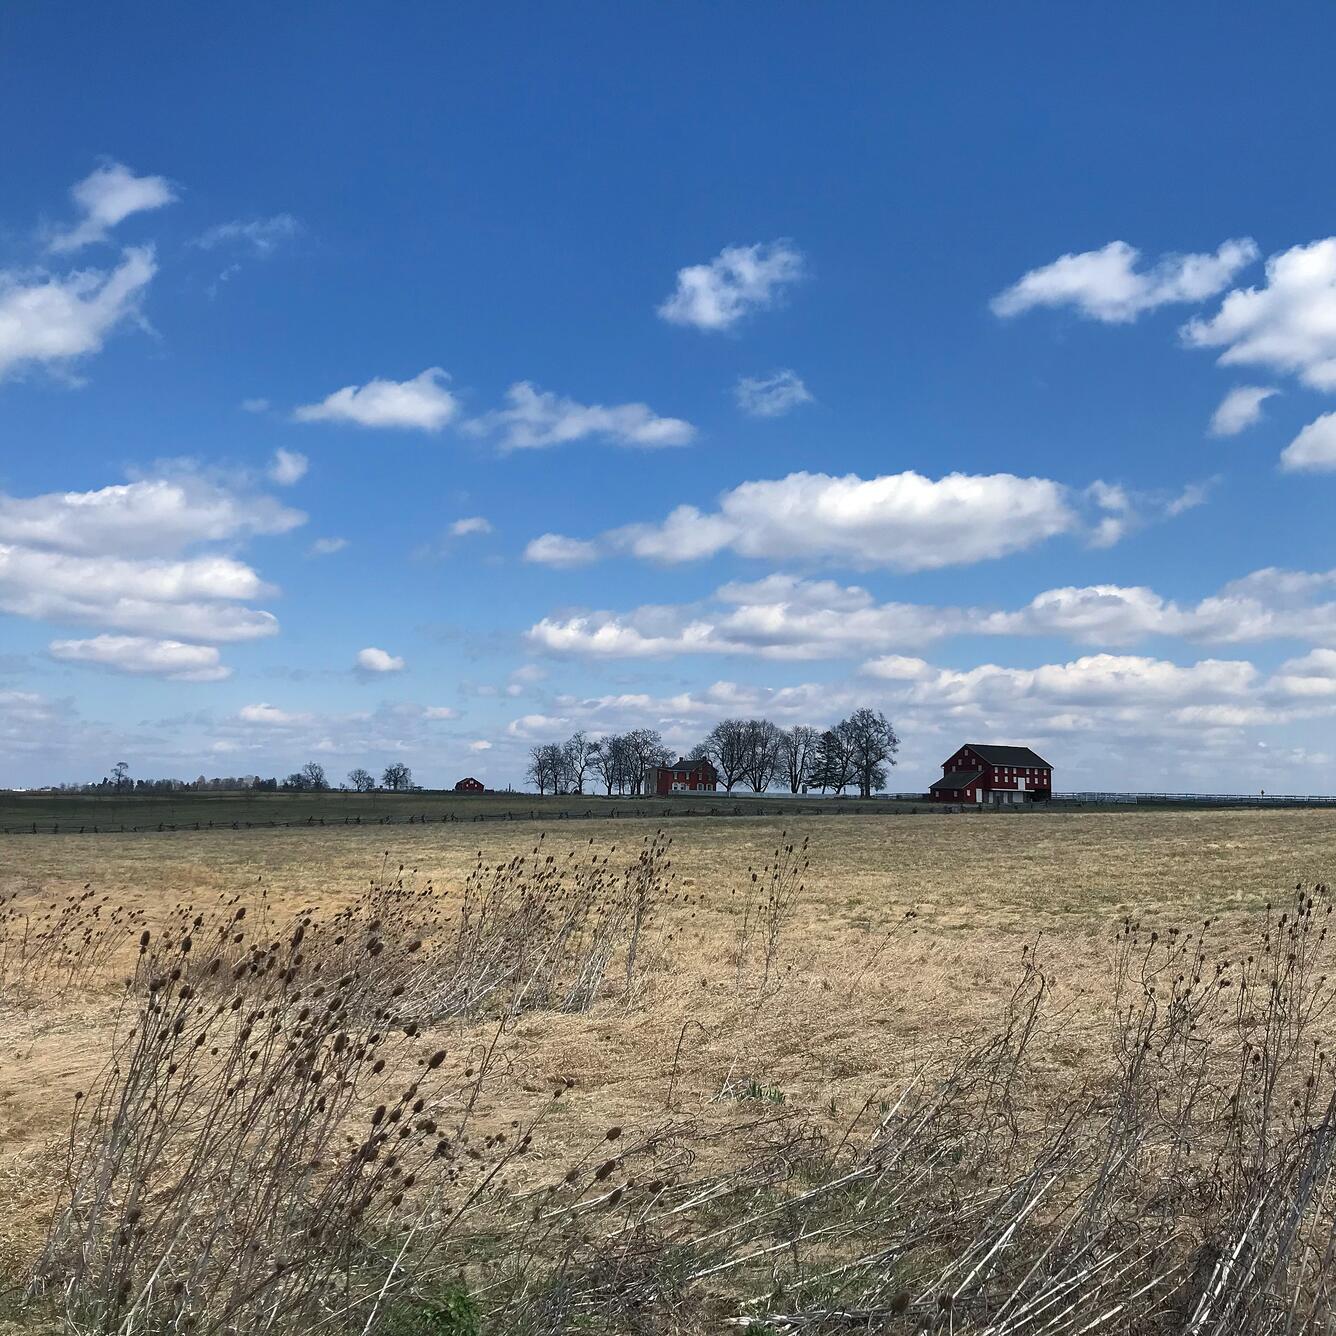 A fallow field in the foreground, an old red bank barn and brick farmhouse, blue sky and fair weather cumulus clouds.